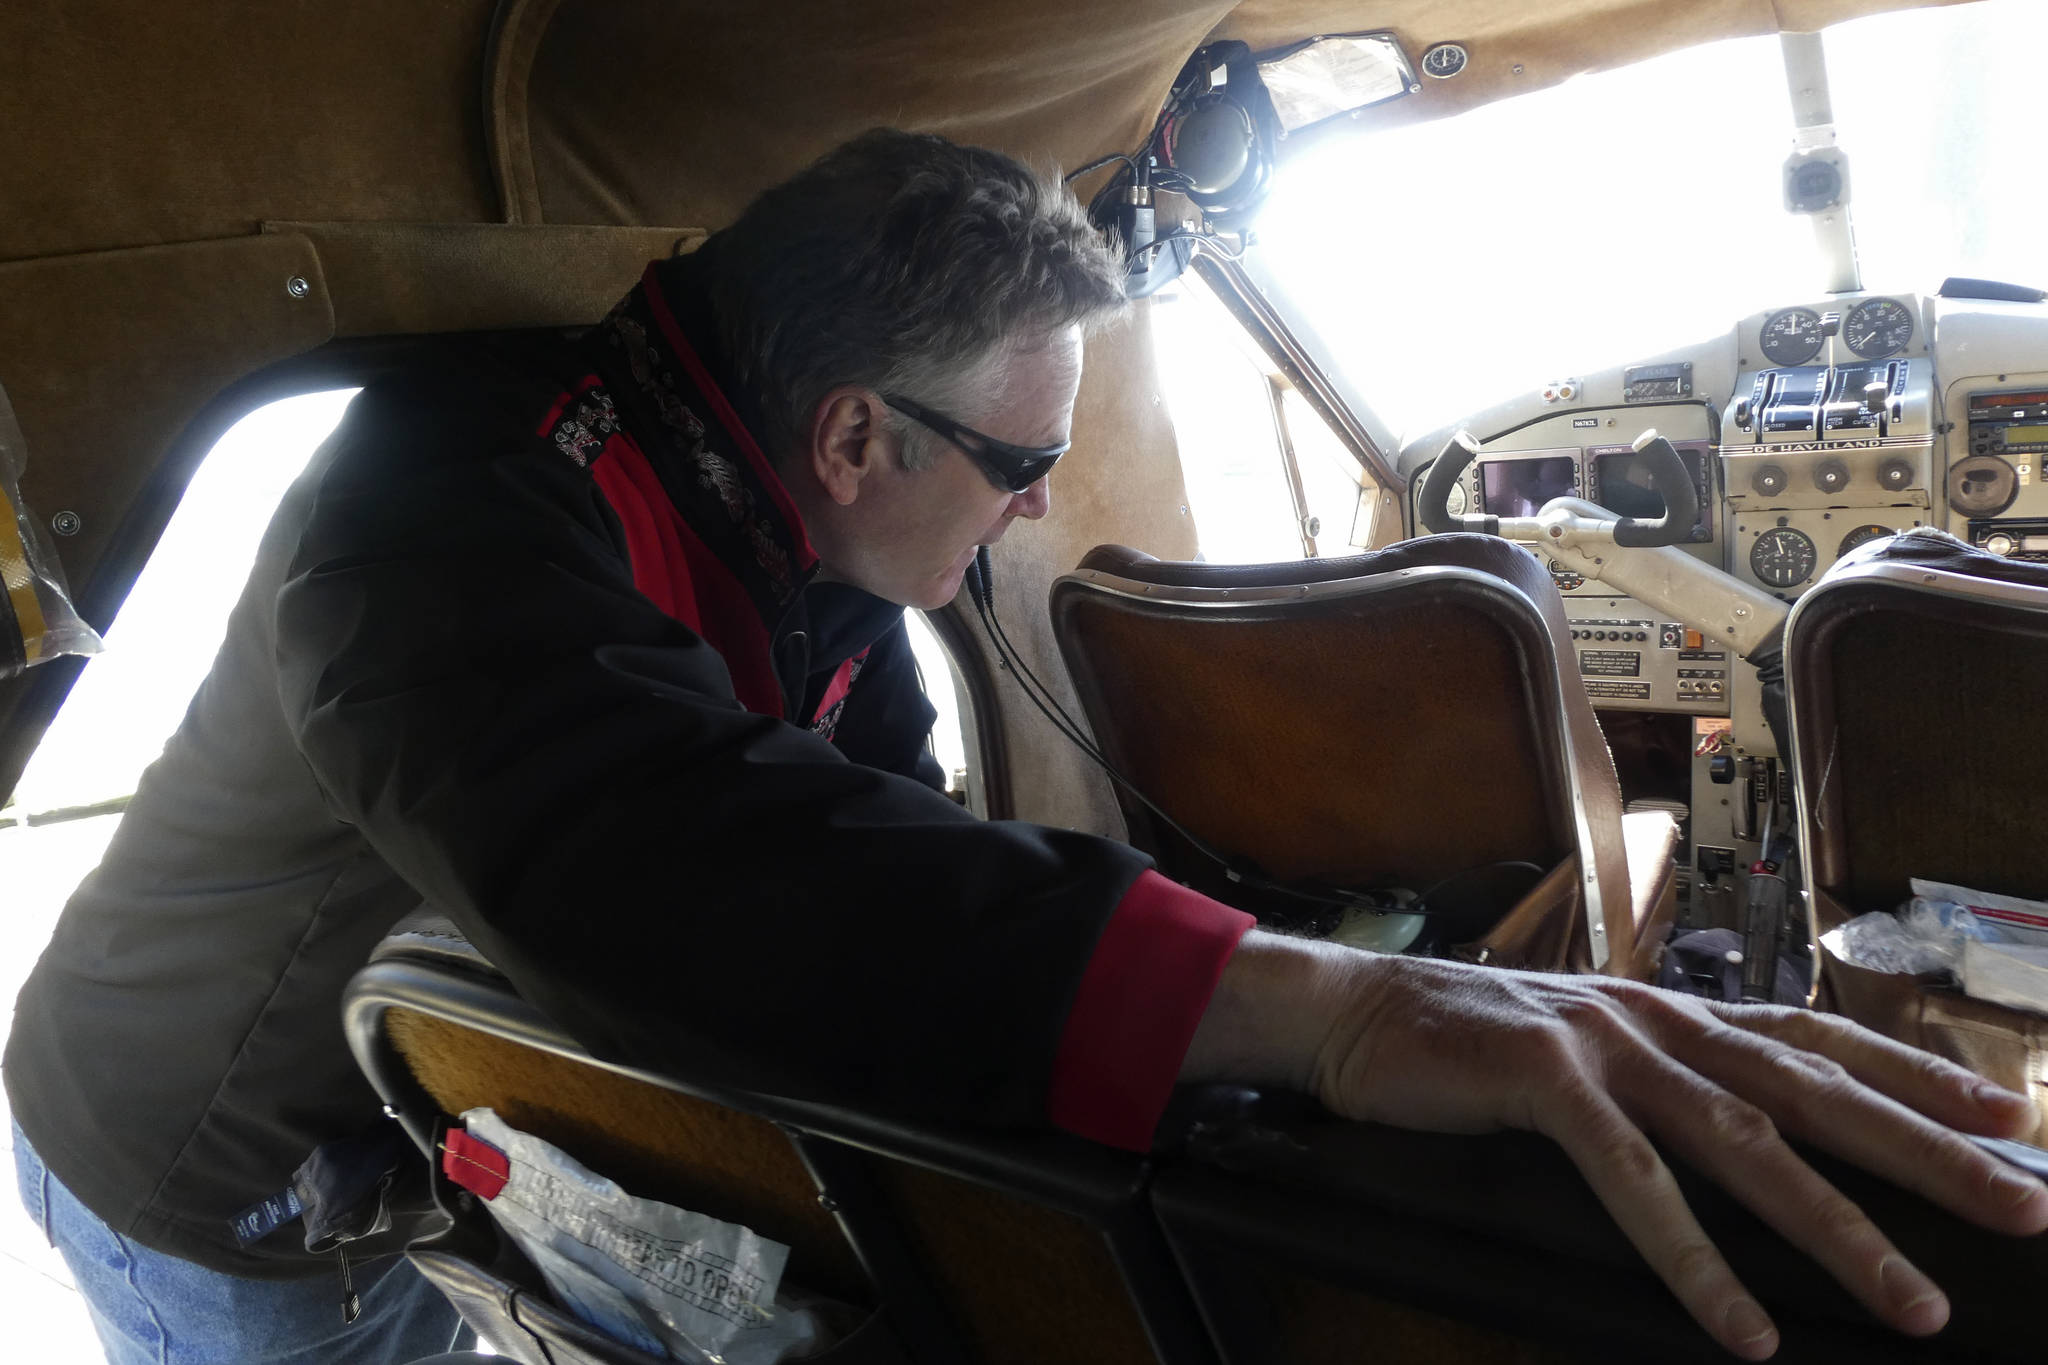 Alaska Gov. Mike Dunleavy climbs into a float plane in Ketchikan, Alaska, on Thursday, April 22, 2021, as he prepares to travel to the community of Hyder near the U.S.-Canada border. Dunleavy visited several southeast Alaska communities as part of a one-day trip. (AP Photo/Becky Bohrer)